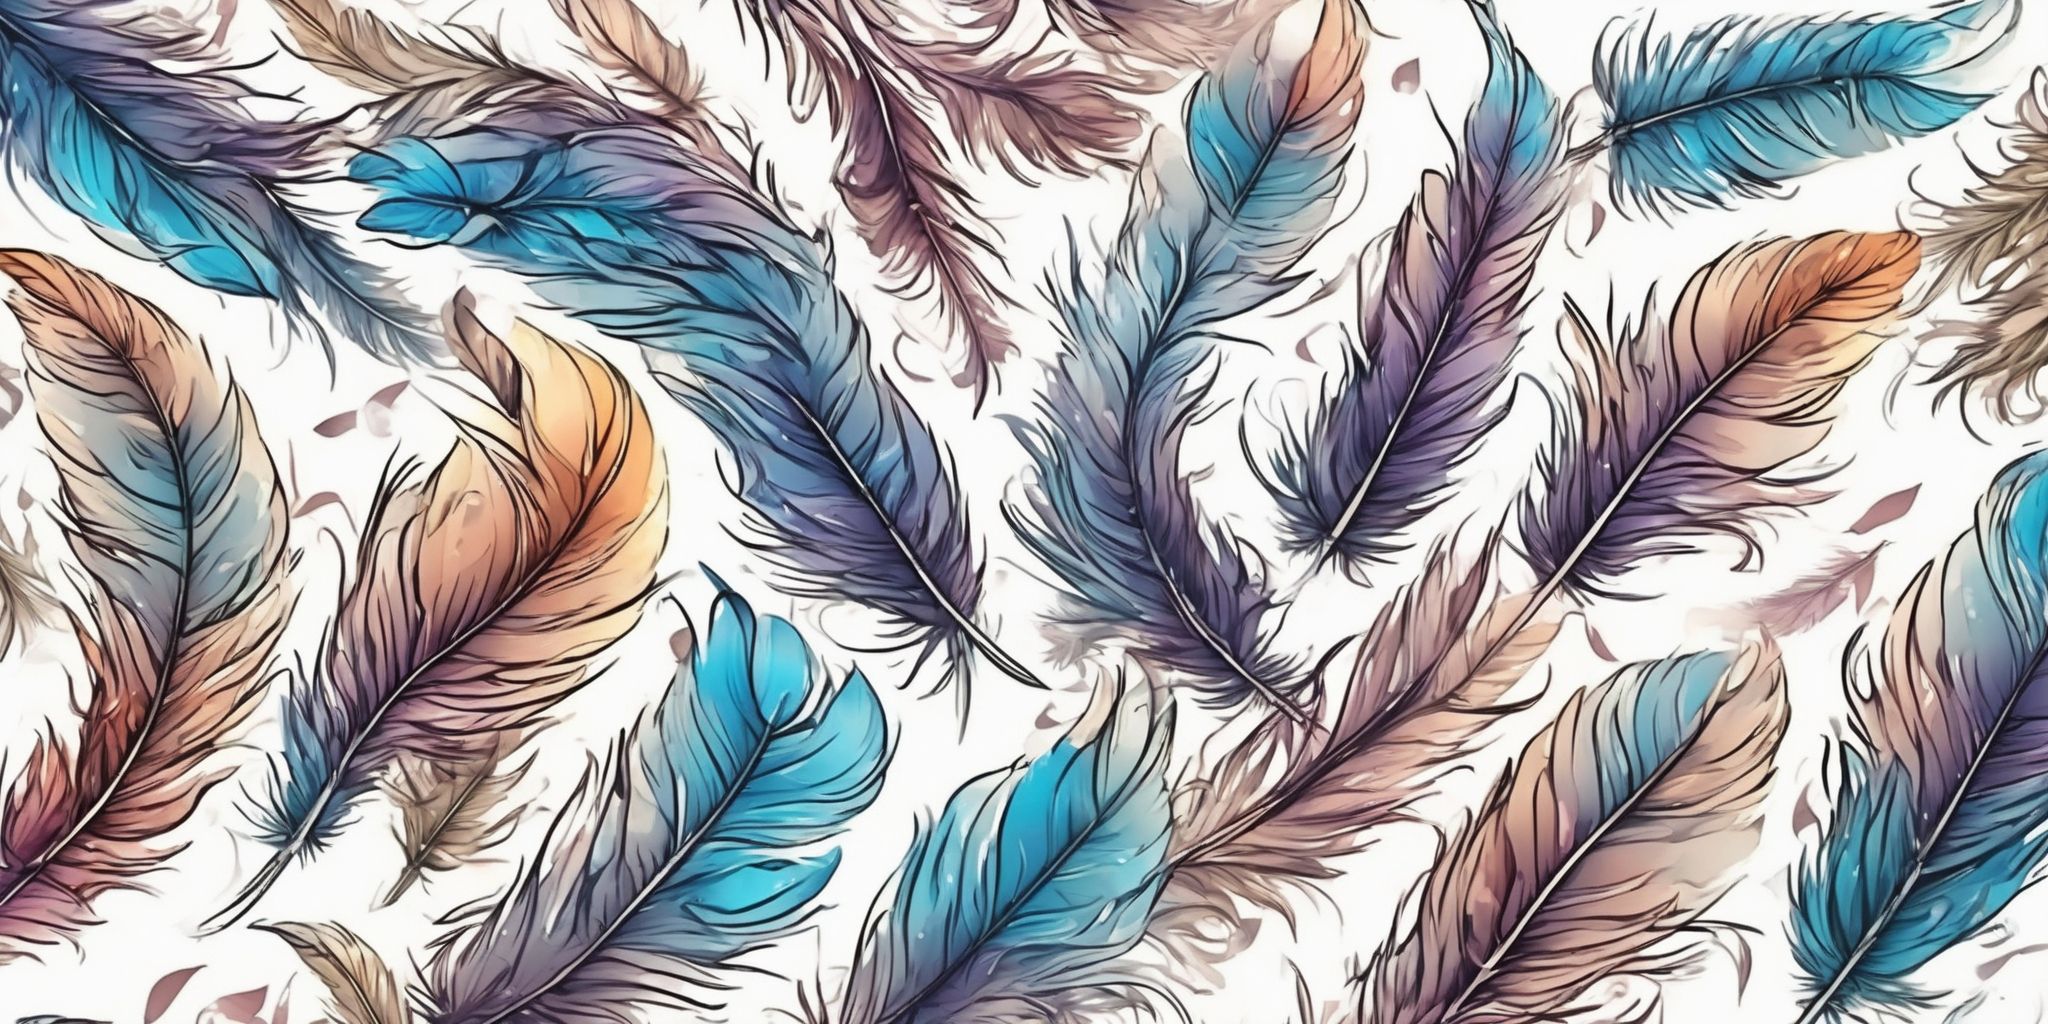 fluttering feathers in illustration style with gradients and white background